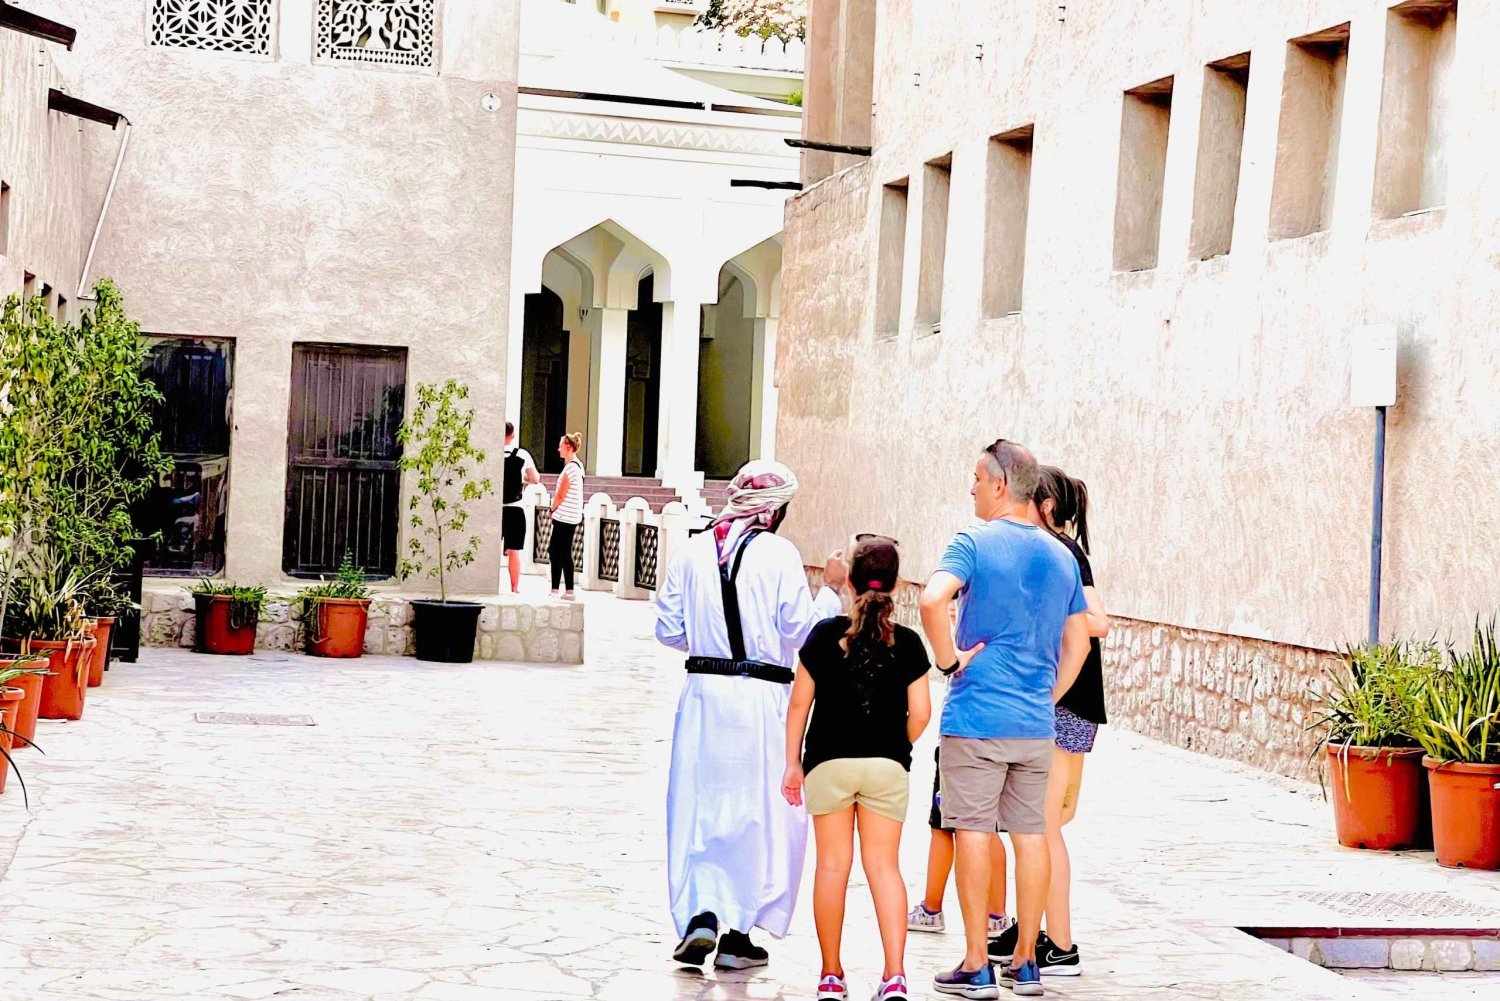 Old dubai, Walking with a local, Markets &street food